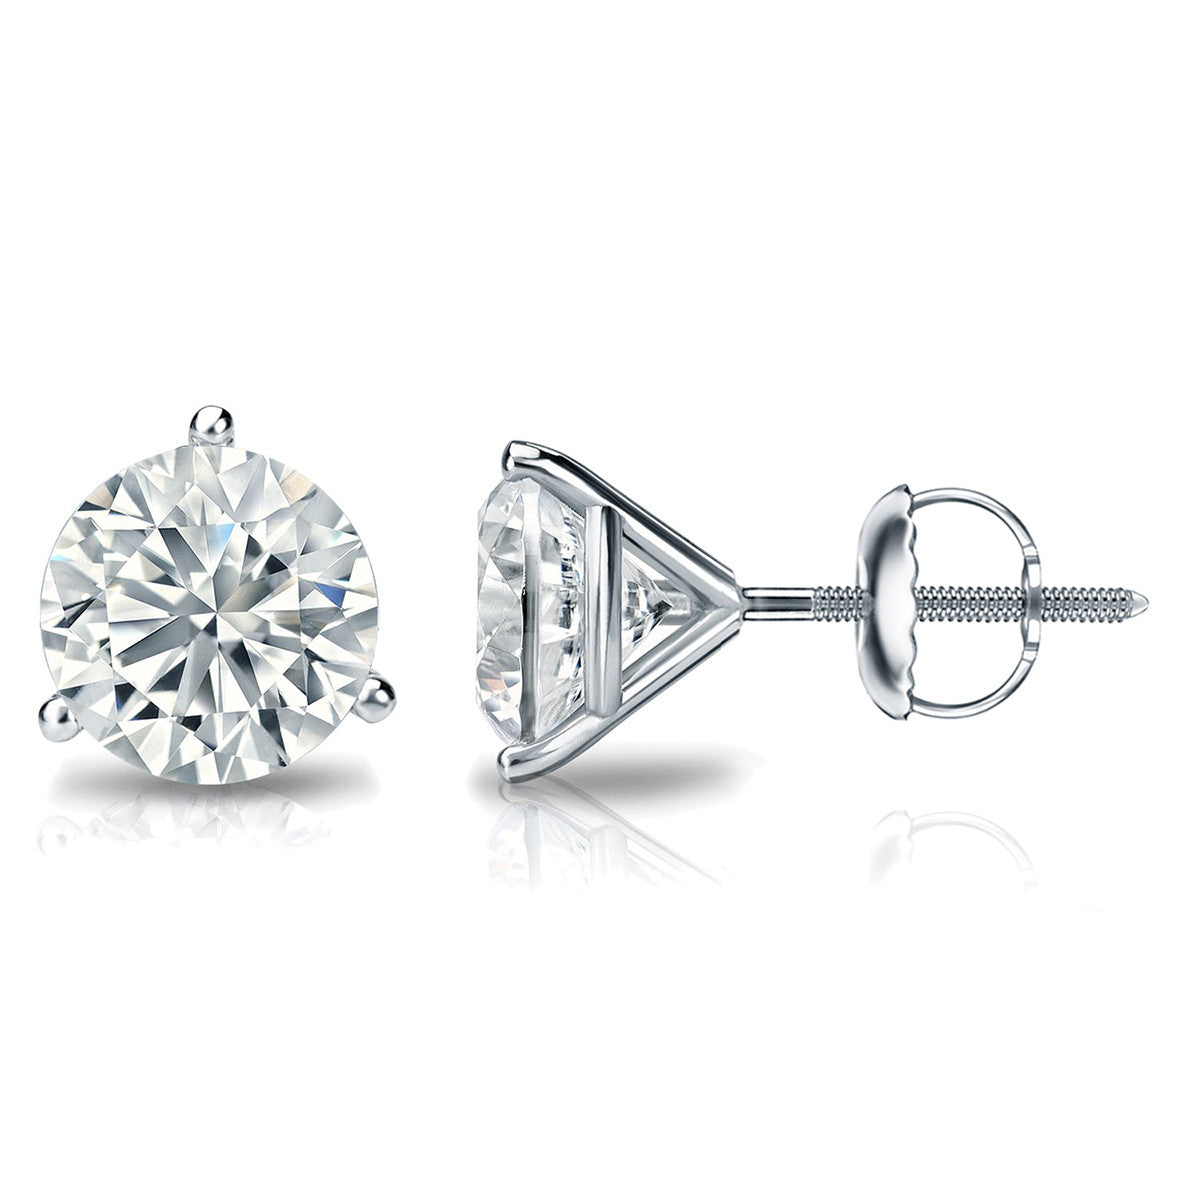 1/2 Carat Round 14K White Gold 3 Prong Martini Set Diamond Solitaire Stud Earrings (Signature Quality)